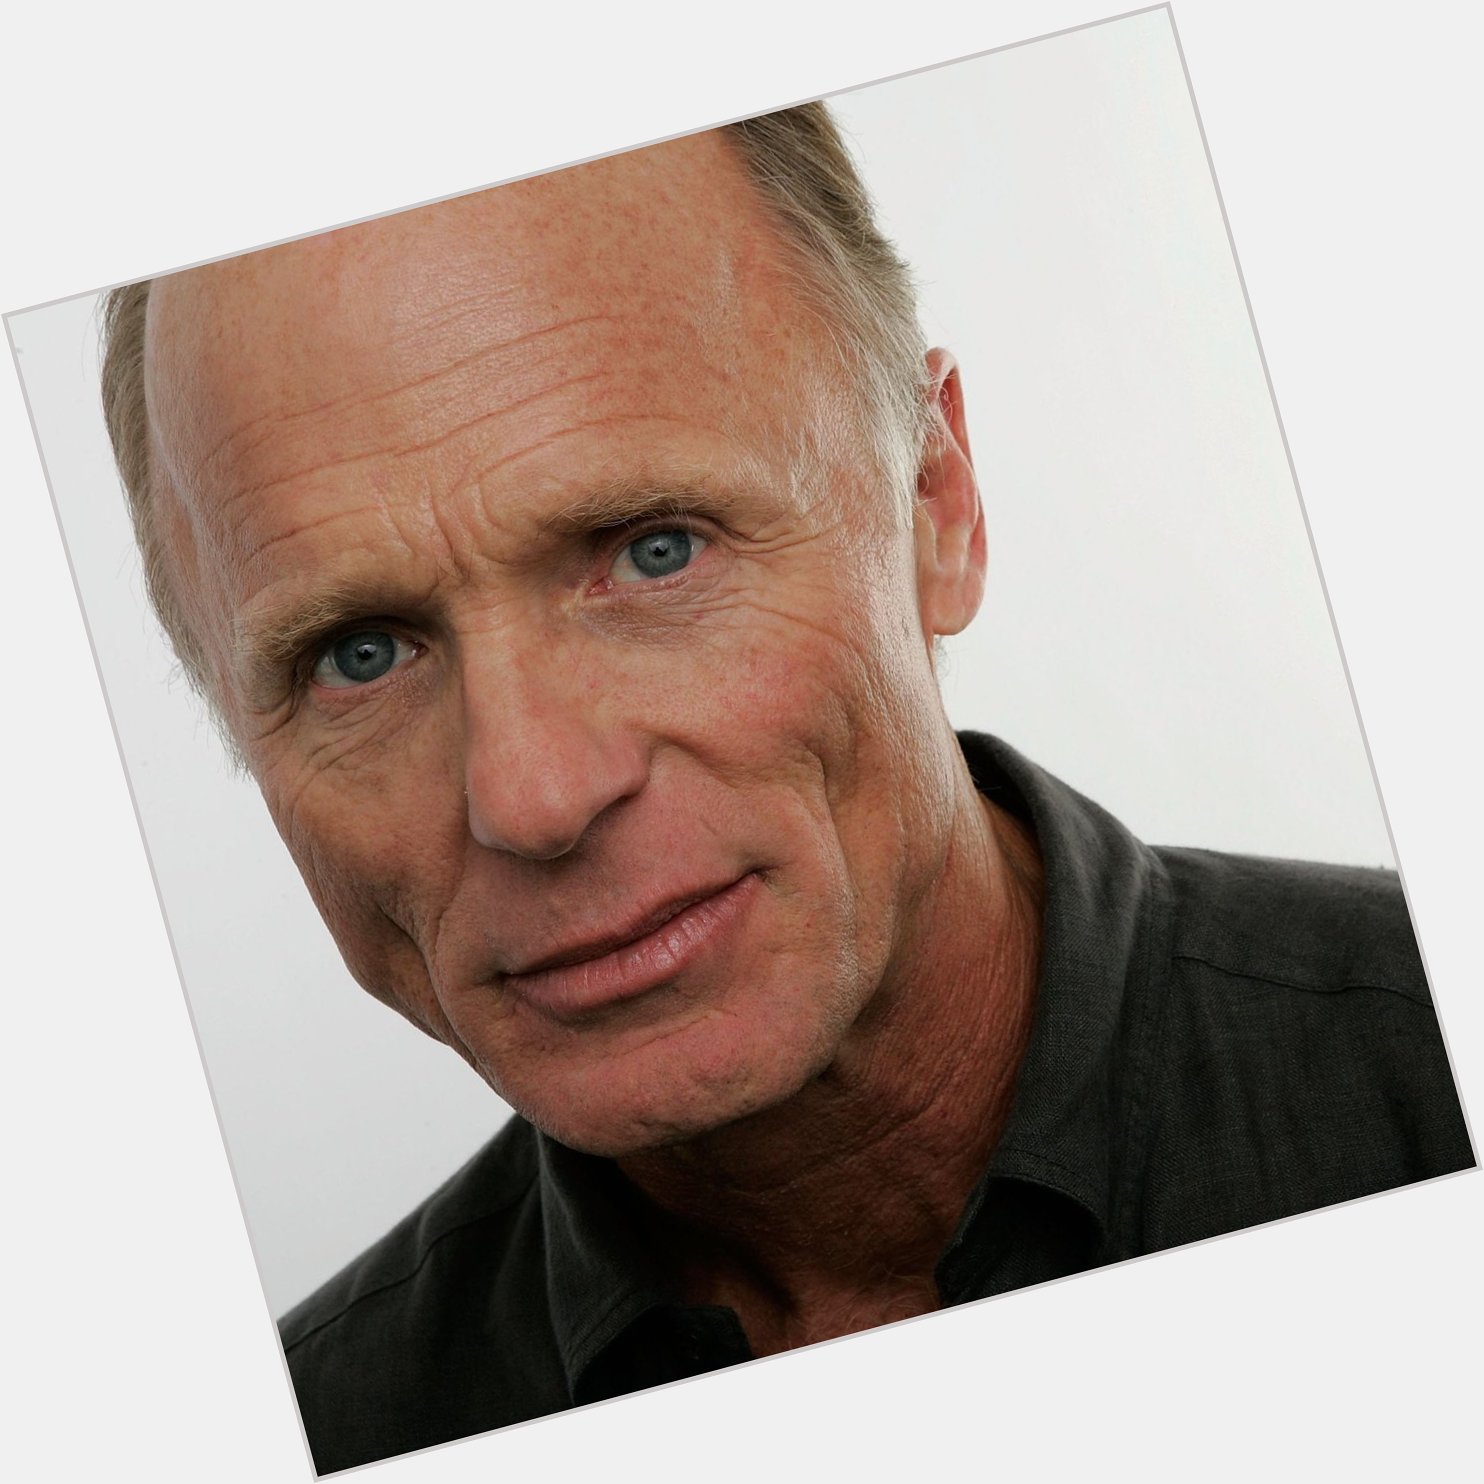 In honour of the fabulous,fabulous, fabulous Ed Harris who celebrated his birthday yesterday. Happy belated birthday 